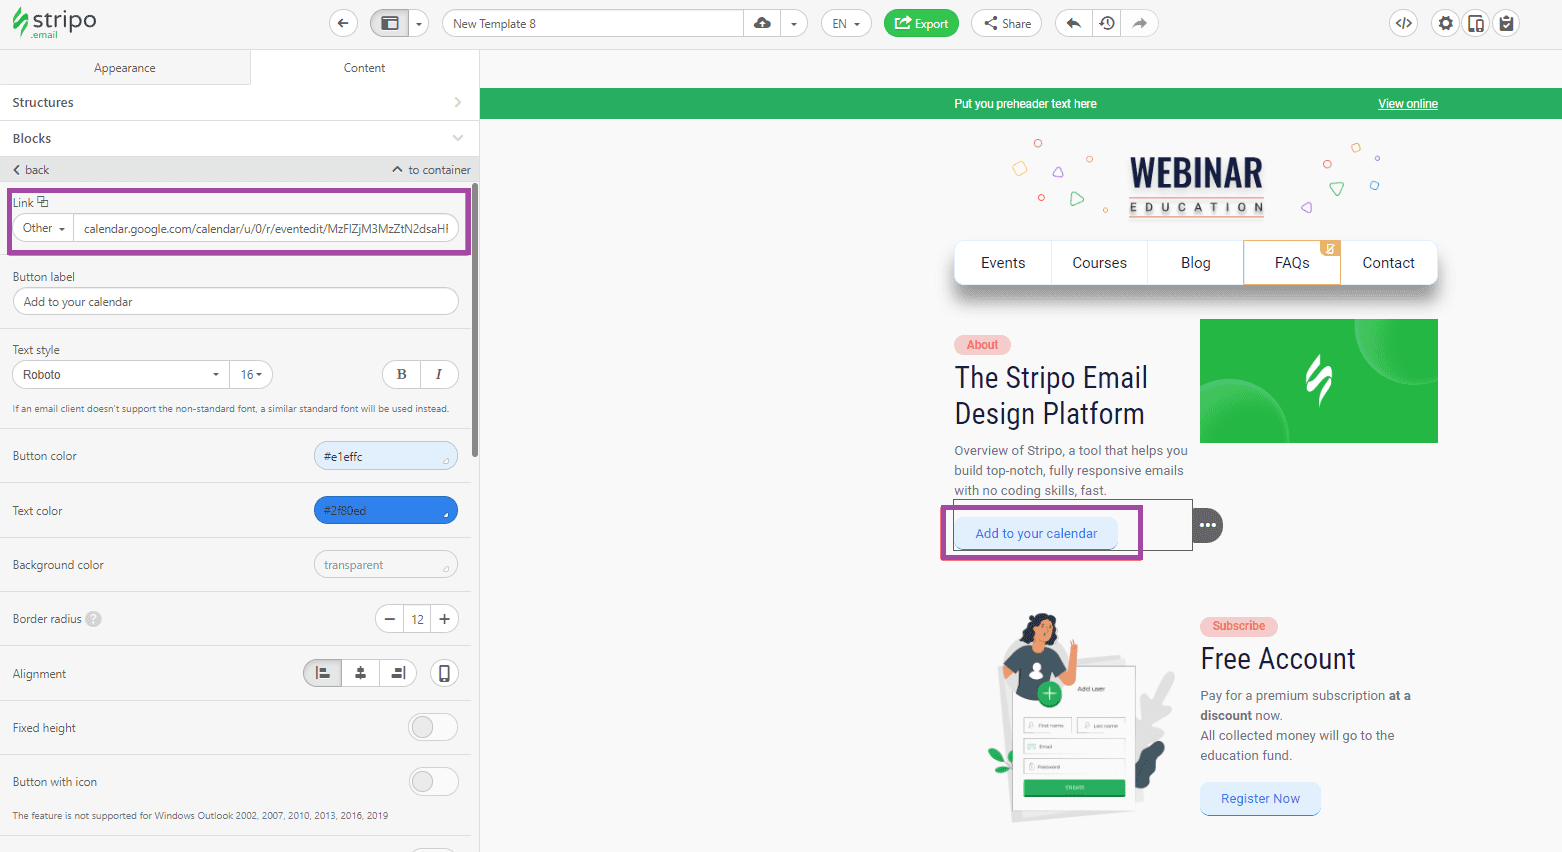 Adding Link to Email